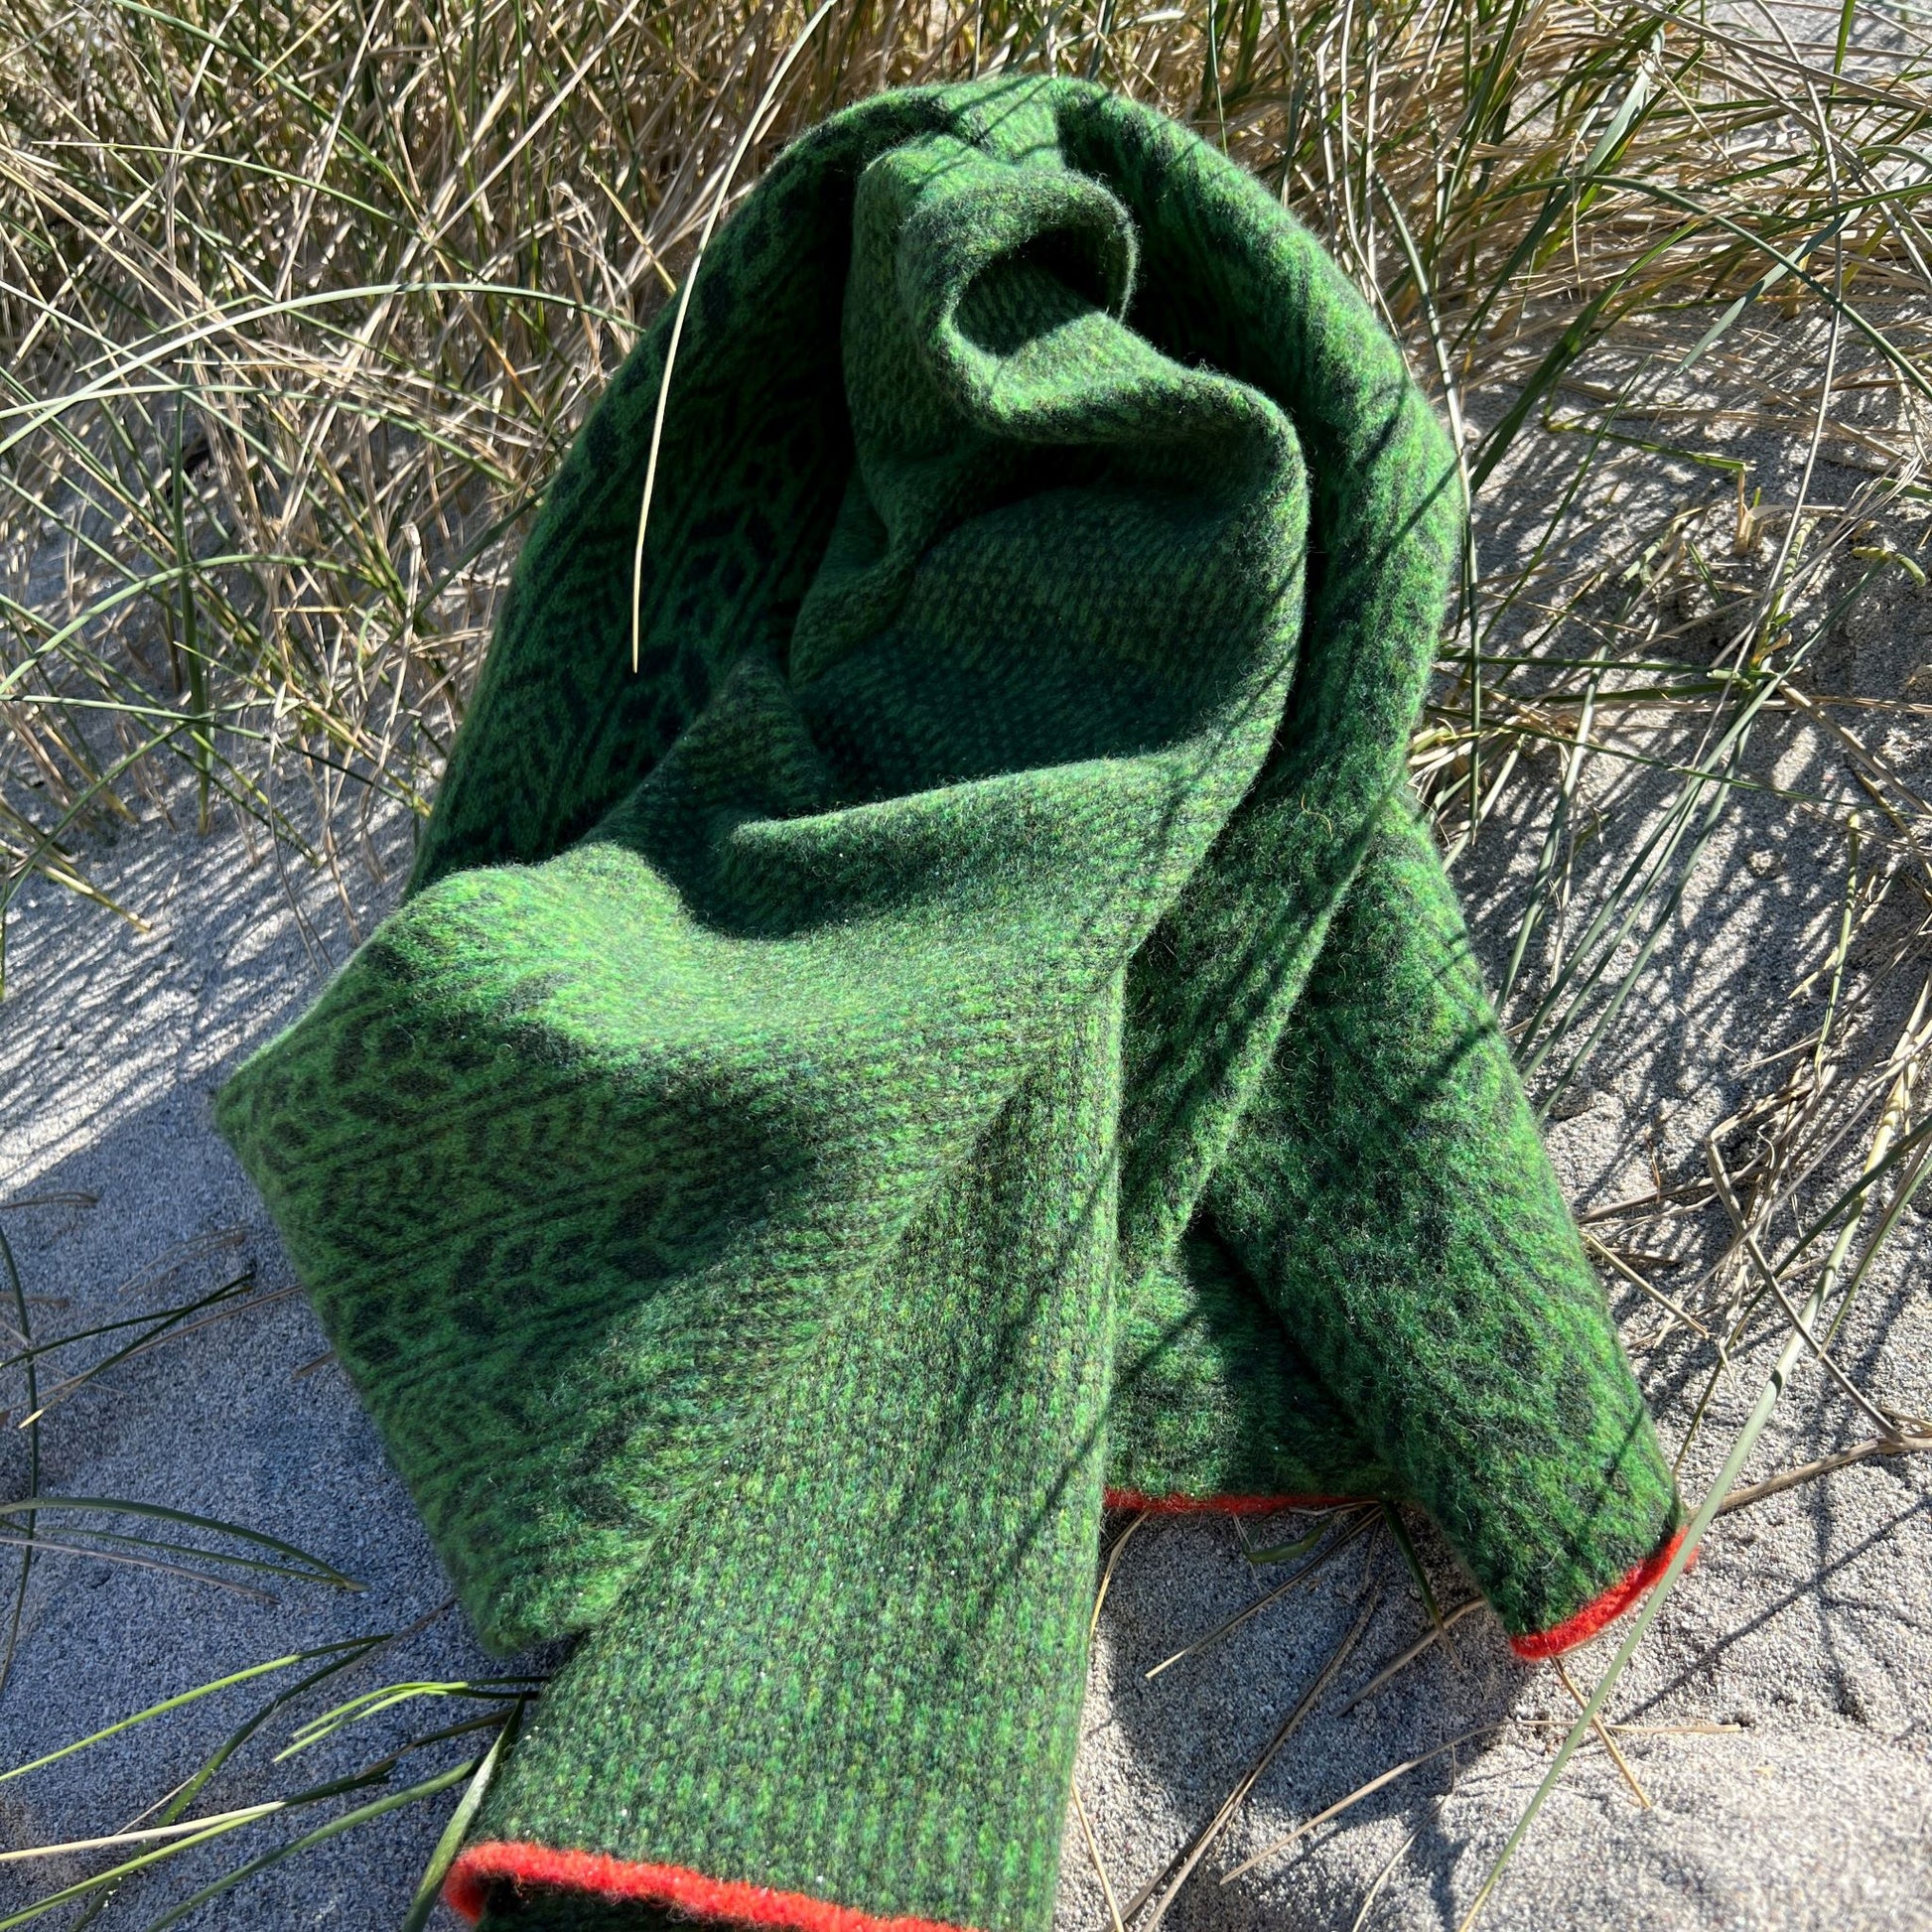 All our scarves are knitted using a punch-card system on a manual vintage knitting machine and are 100% Merino lamb's wool.  Dry clean or wash by hand. Seen here in Juniper green.